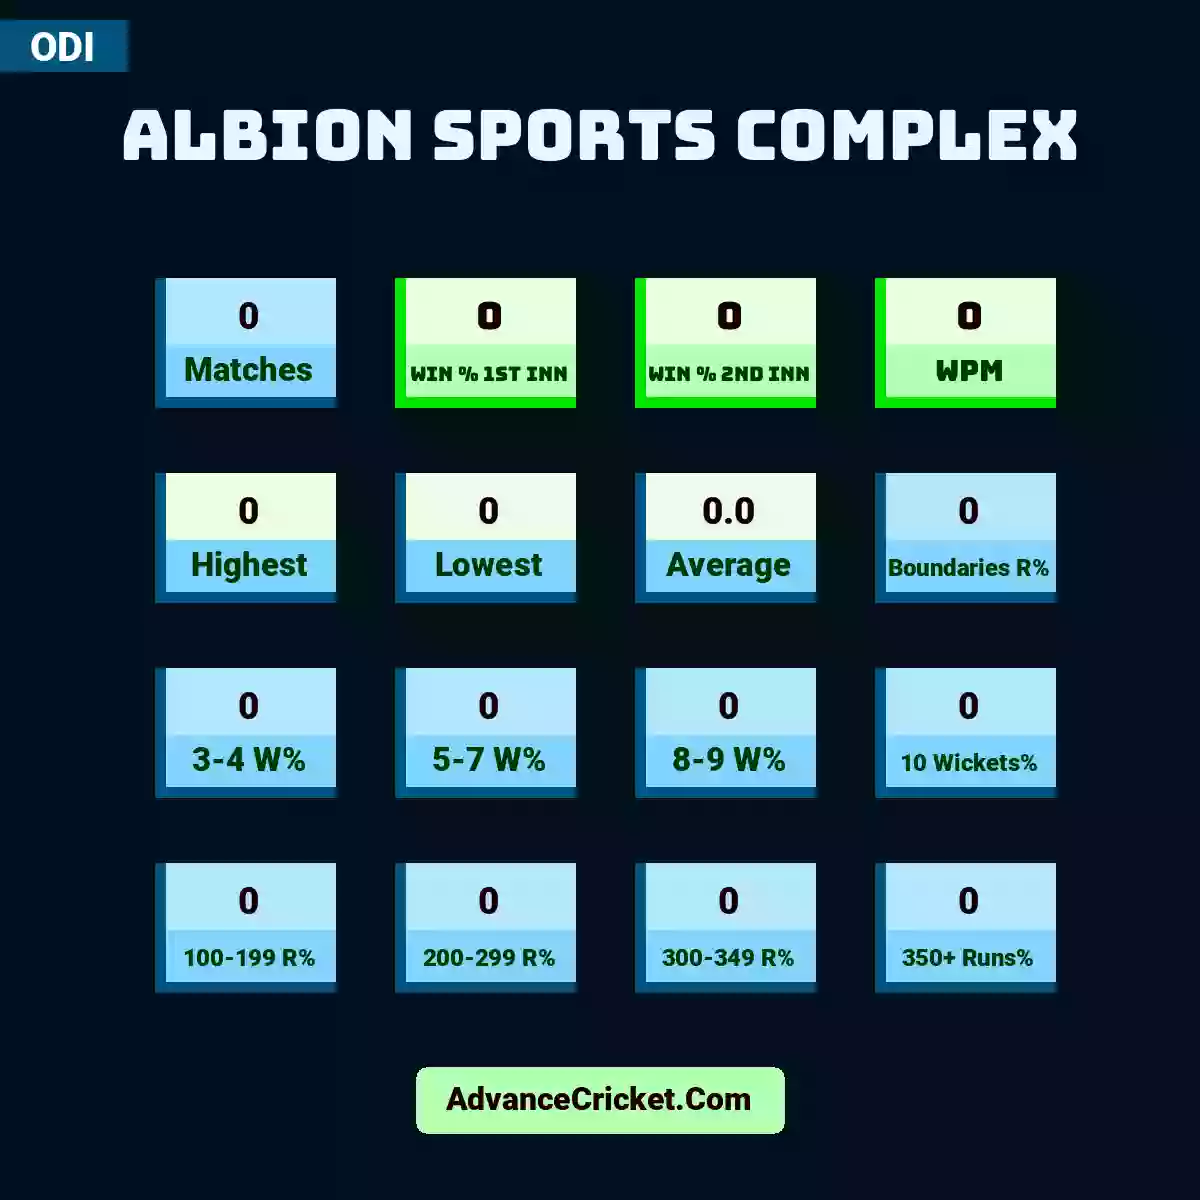 Image showing Albion Sports Complex with Matches: 0, Win % 1st Inn: 0, Win % 2nd Inn: 0, WPM: 0, Highest: 0, Lowest: 0, Average: 0.0, Boundaries R%: 0, 3-4 W%: 0, 5-7 W%: 0, 8-9 W%: 0, 10 Wickets%: 0, 100-199 R%: 0, 200-299 R%: 0, 300-349 R%: 0, 350+ Runs%: 0.